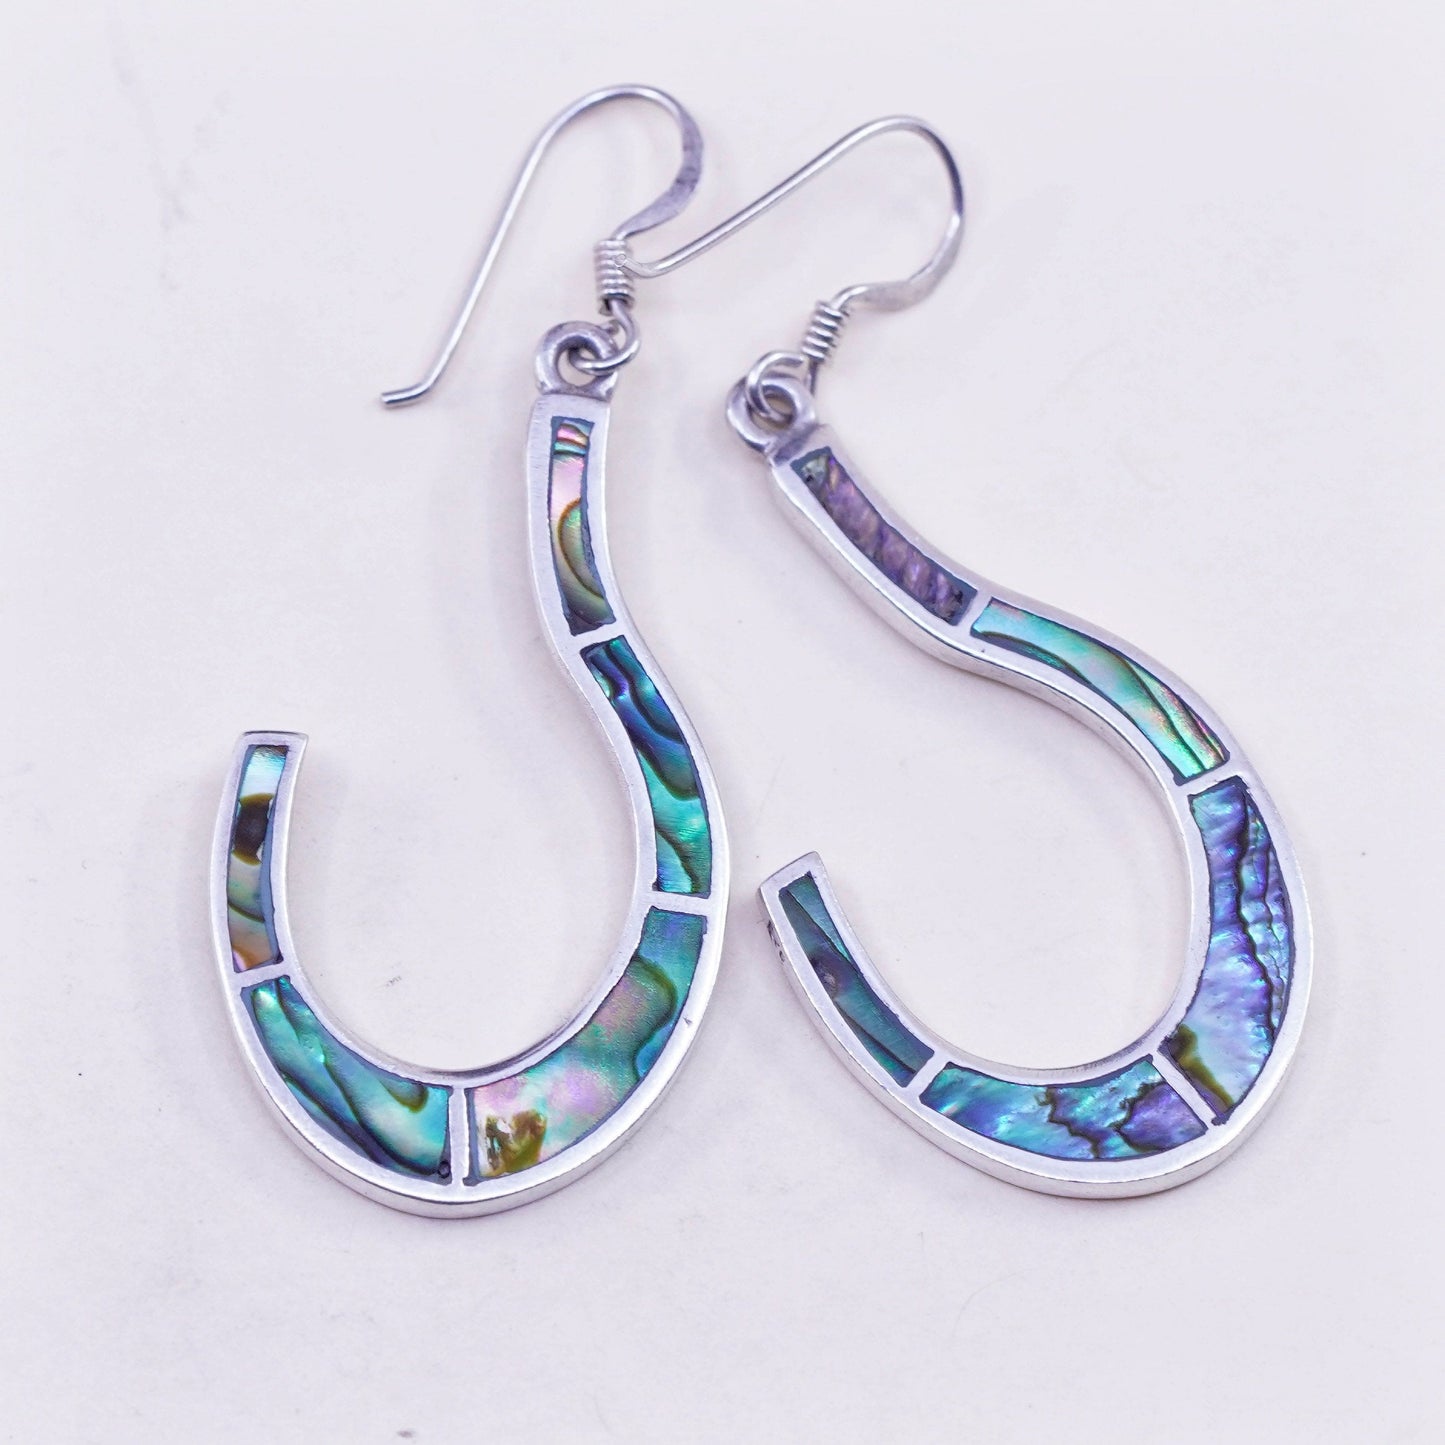 Vintage Sterling 925 silver handmade earrings, dangles with abalone inlay